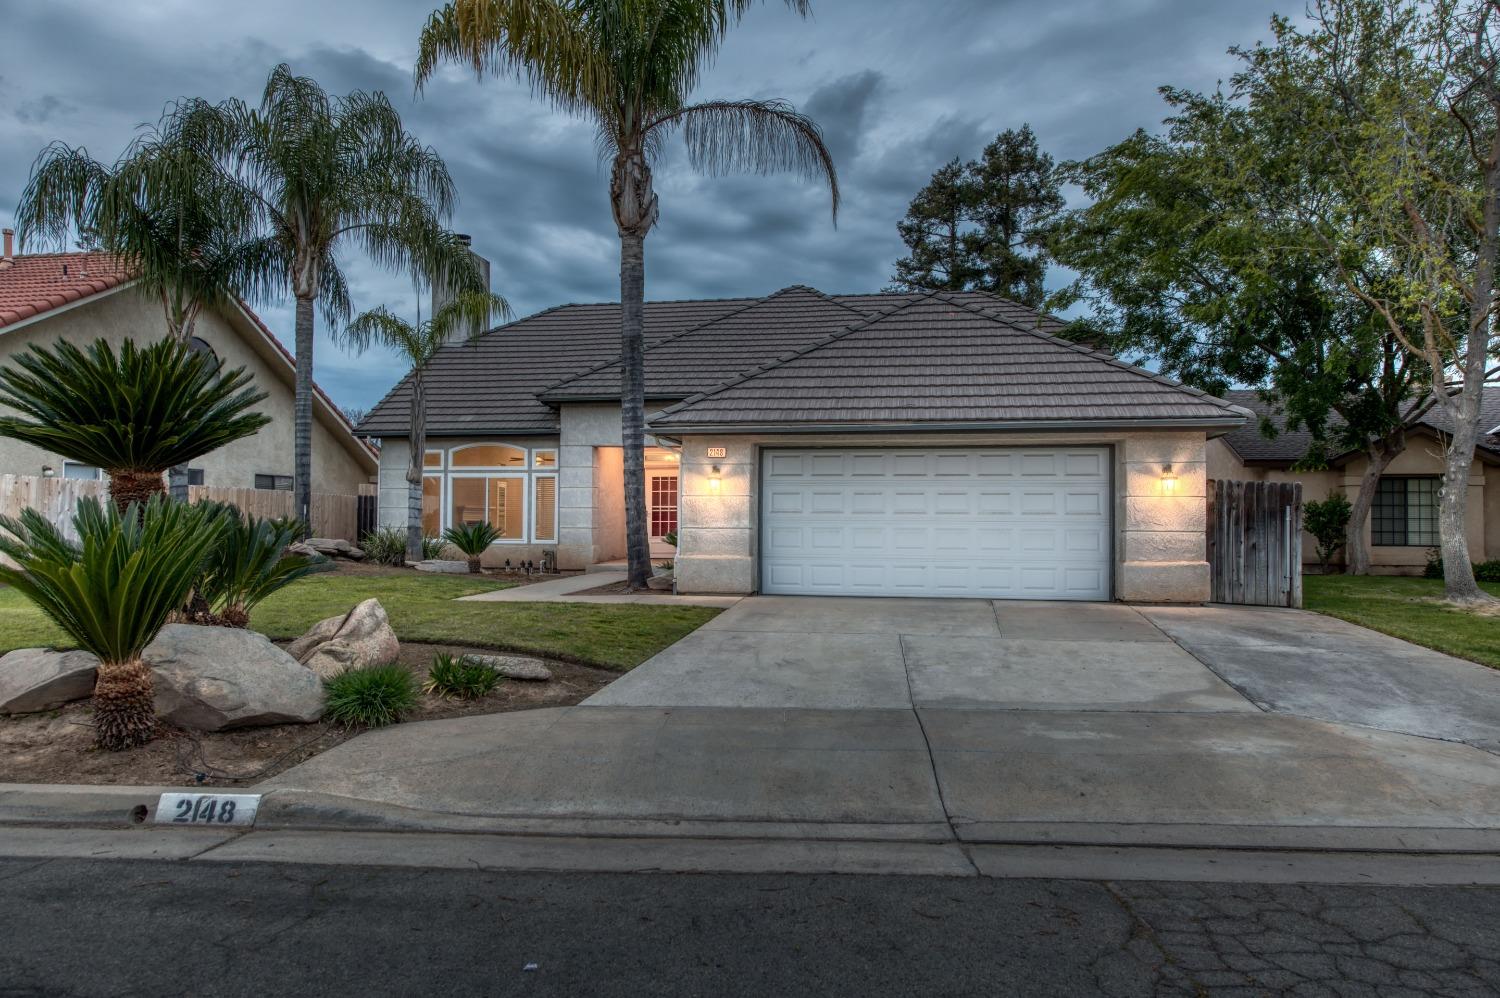 This single story home falls within the boundaries of Clovis Unified, specifically Clovis North High School. This residence has 3 bedrooms, 2 bathrooms and a swimming pool. The front yard has great curb appeal with the palm trees and sagos. The main living space is a very open concept blending together the kitchen, formal dining area and family room. The combination of the fireplace and lofty ceilings creates an enhanced sense of spaciousness and comfort. The kitchen features a gas stove, pantry and room for bar stool seating at the island. The Anlin windows, whole house fan and newer HVAC unit are a few amenities that are helpful for energy efficiency. The master suite is spacious and was added onto, providing a second master closet / office or fitness area. The backyard revolves around the swimming pool, and with the rising Fresno temperatures, it's going to be a hot commodity. The backyard is low maintenance, has a covered patio and has room for you to add your own putting green, lounge area or outdoor kitchen!